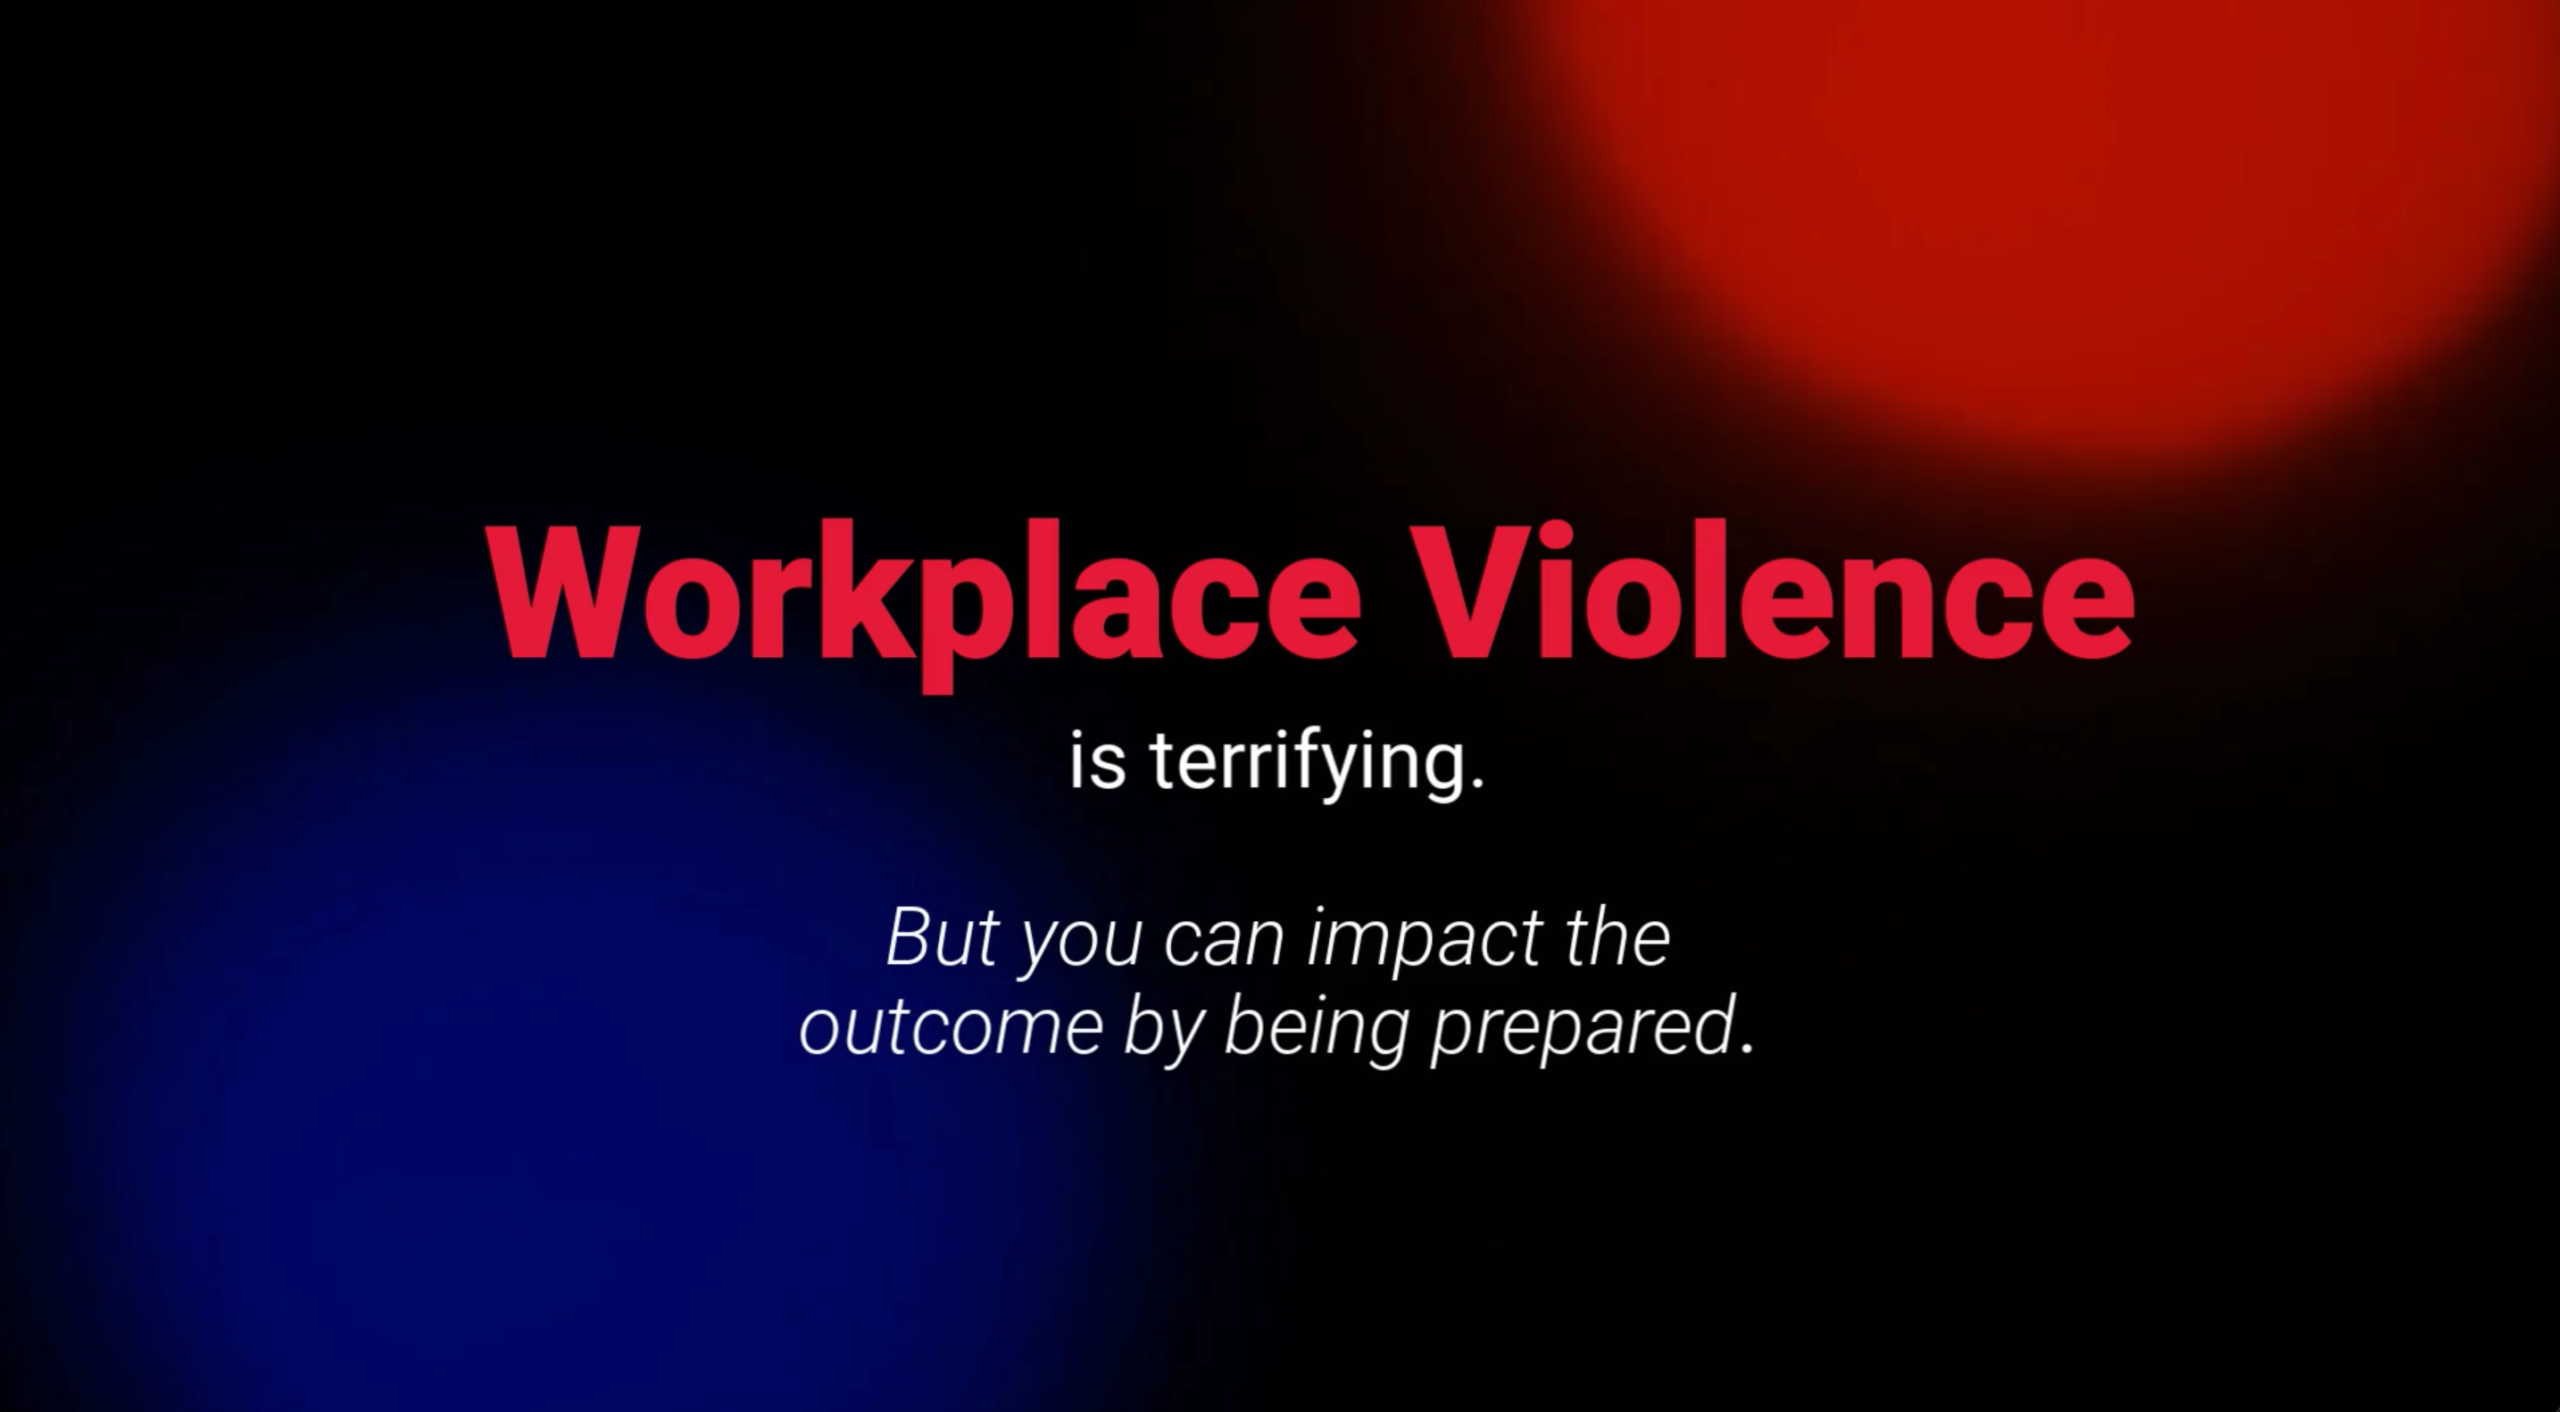 Workplace Violence Video Image